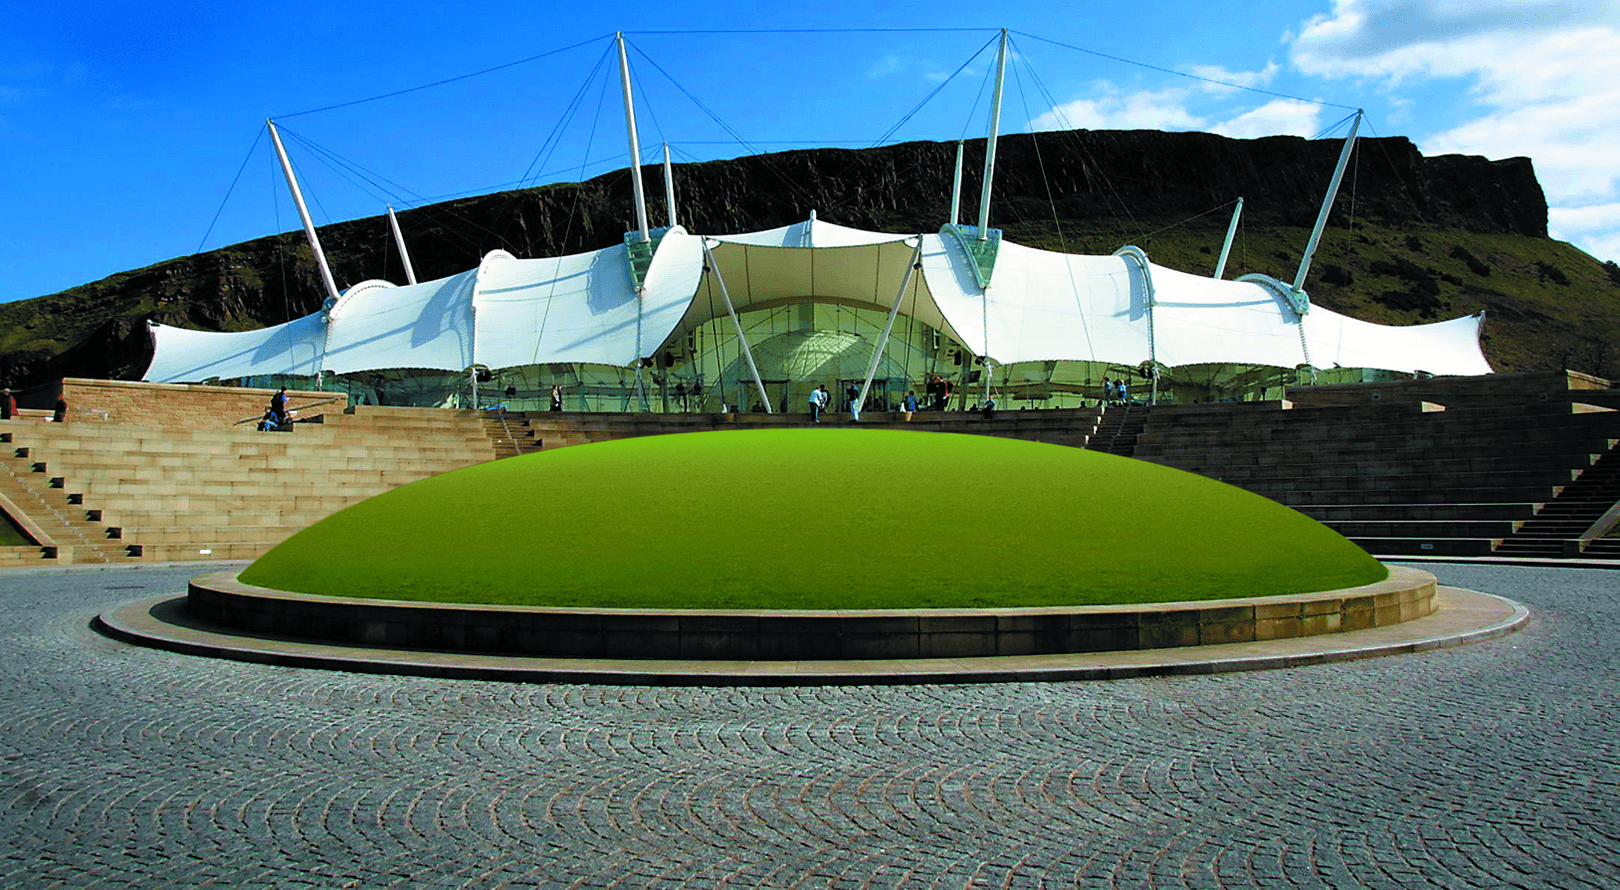 Photo: Our Dynamic Earth